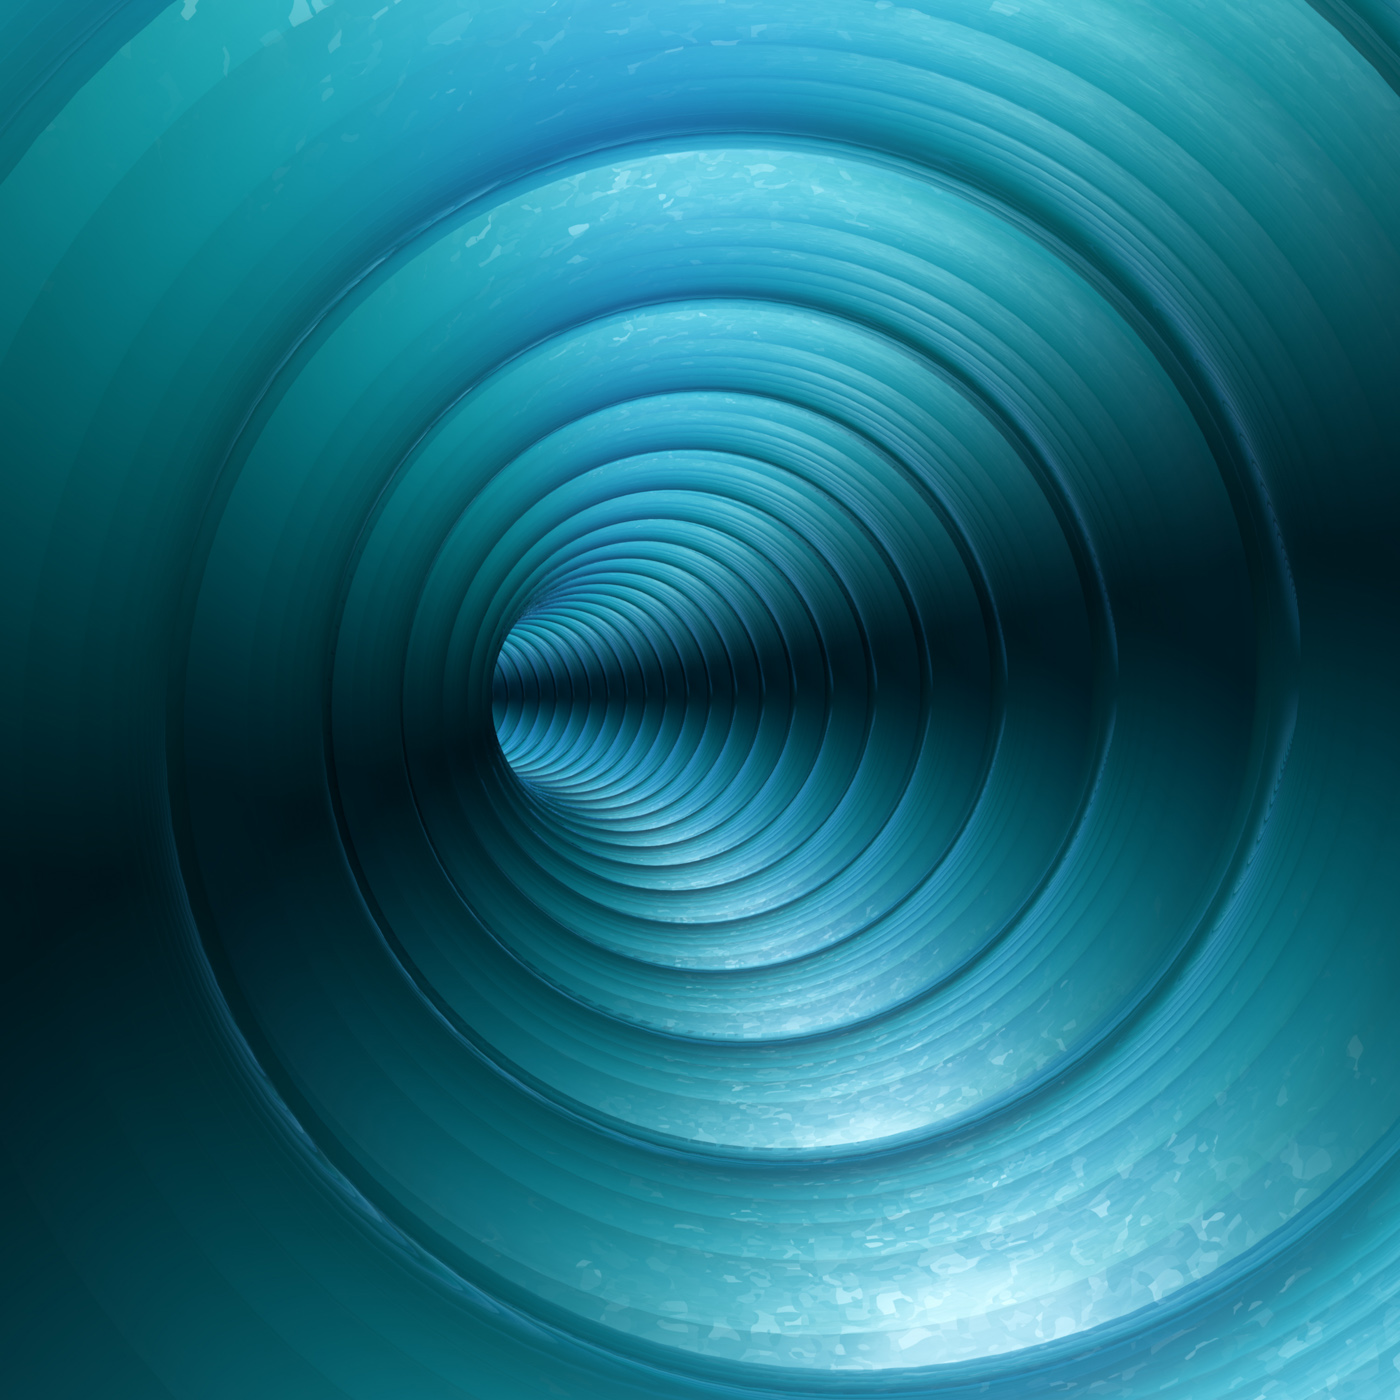 Turquoise vortex abstract background with twirling twisting spiral photo